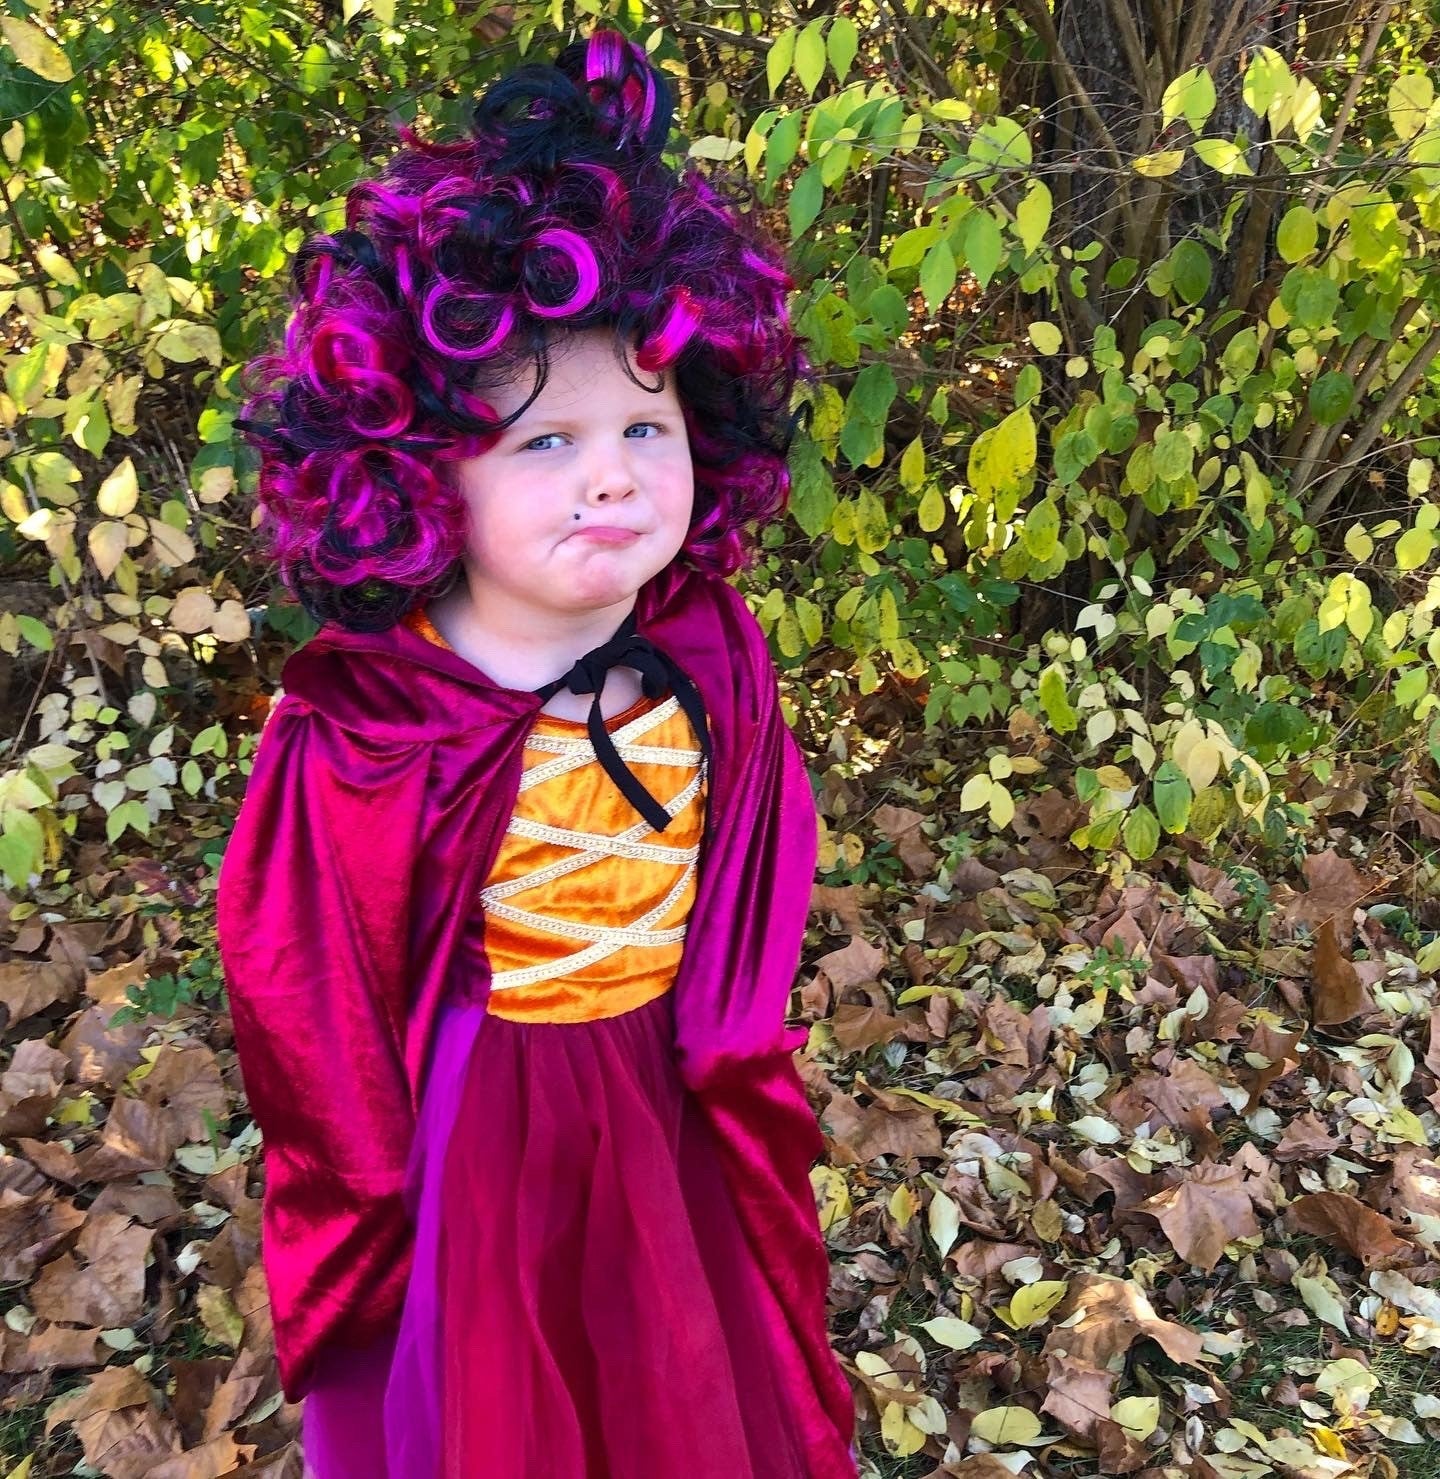 Kids Girls Hocus Pocus Witch Costume Baby Girls Halloween Costume Tutu Dress With a Velvet Cape And Wigs Sister Set